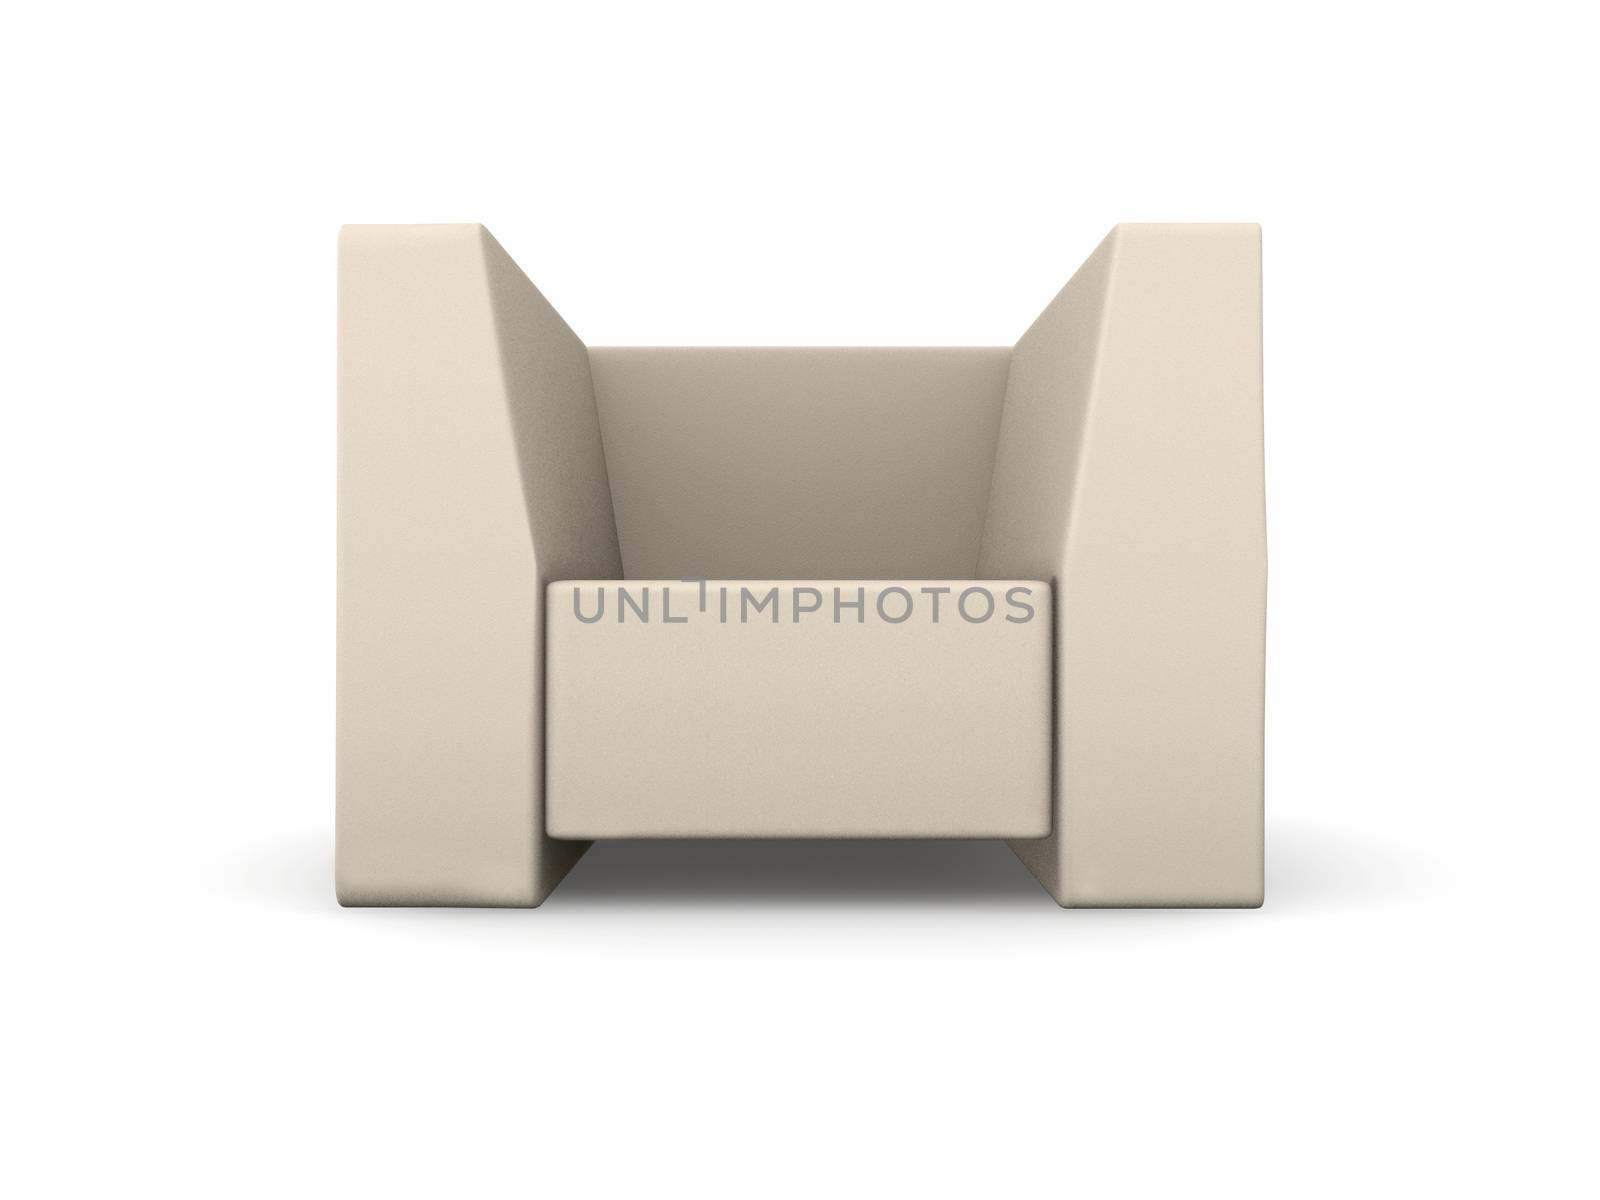 Armchair by Spectral